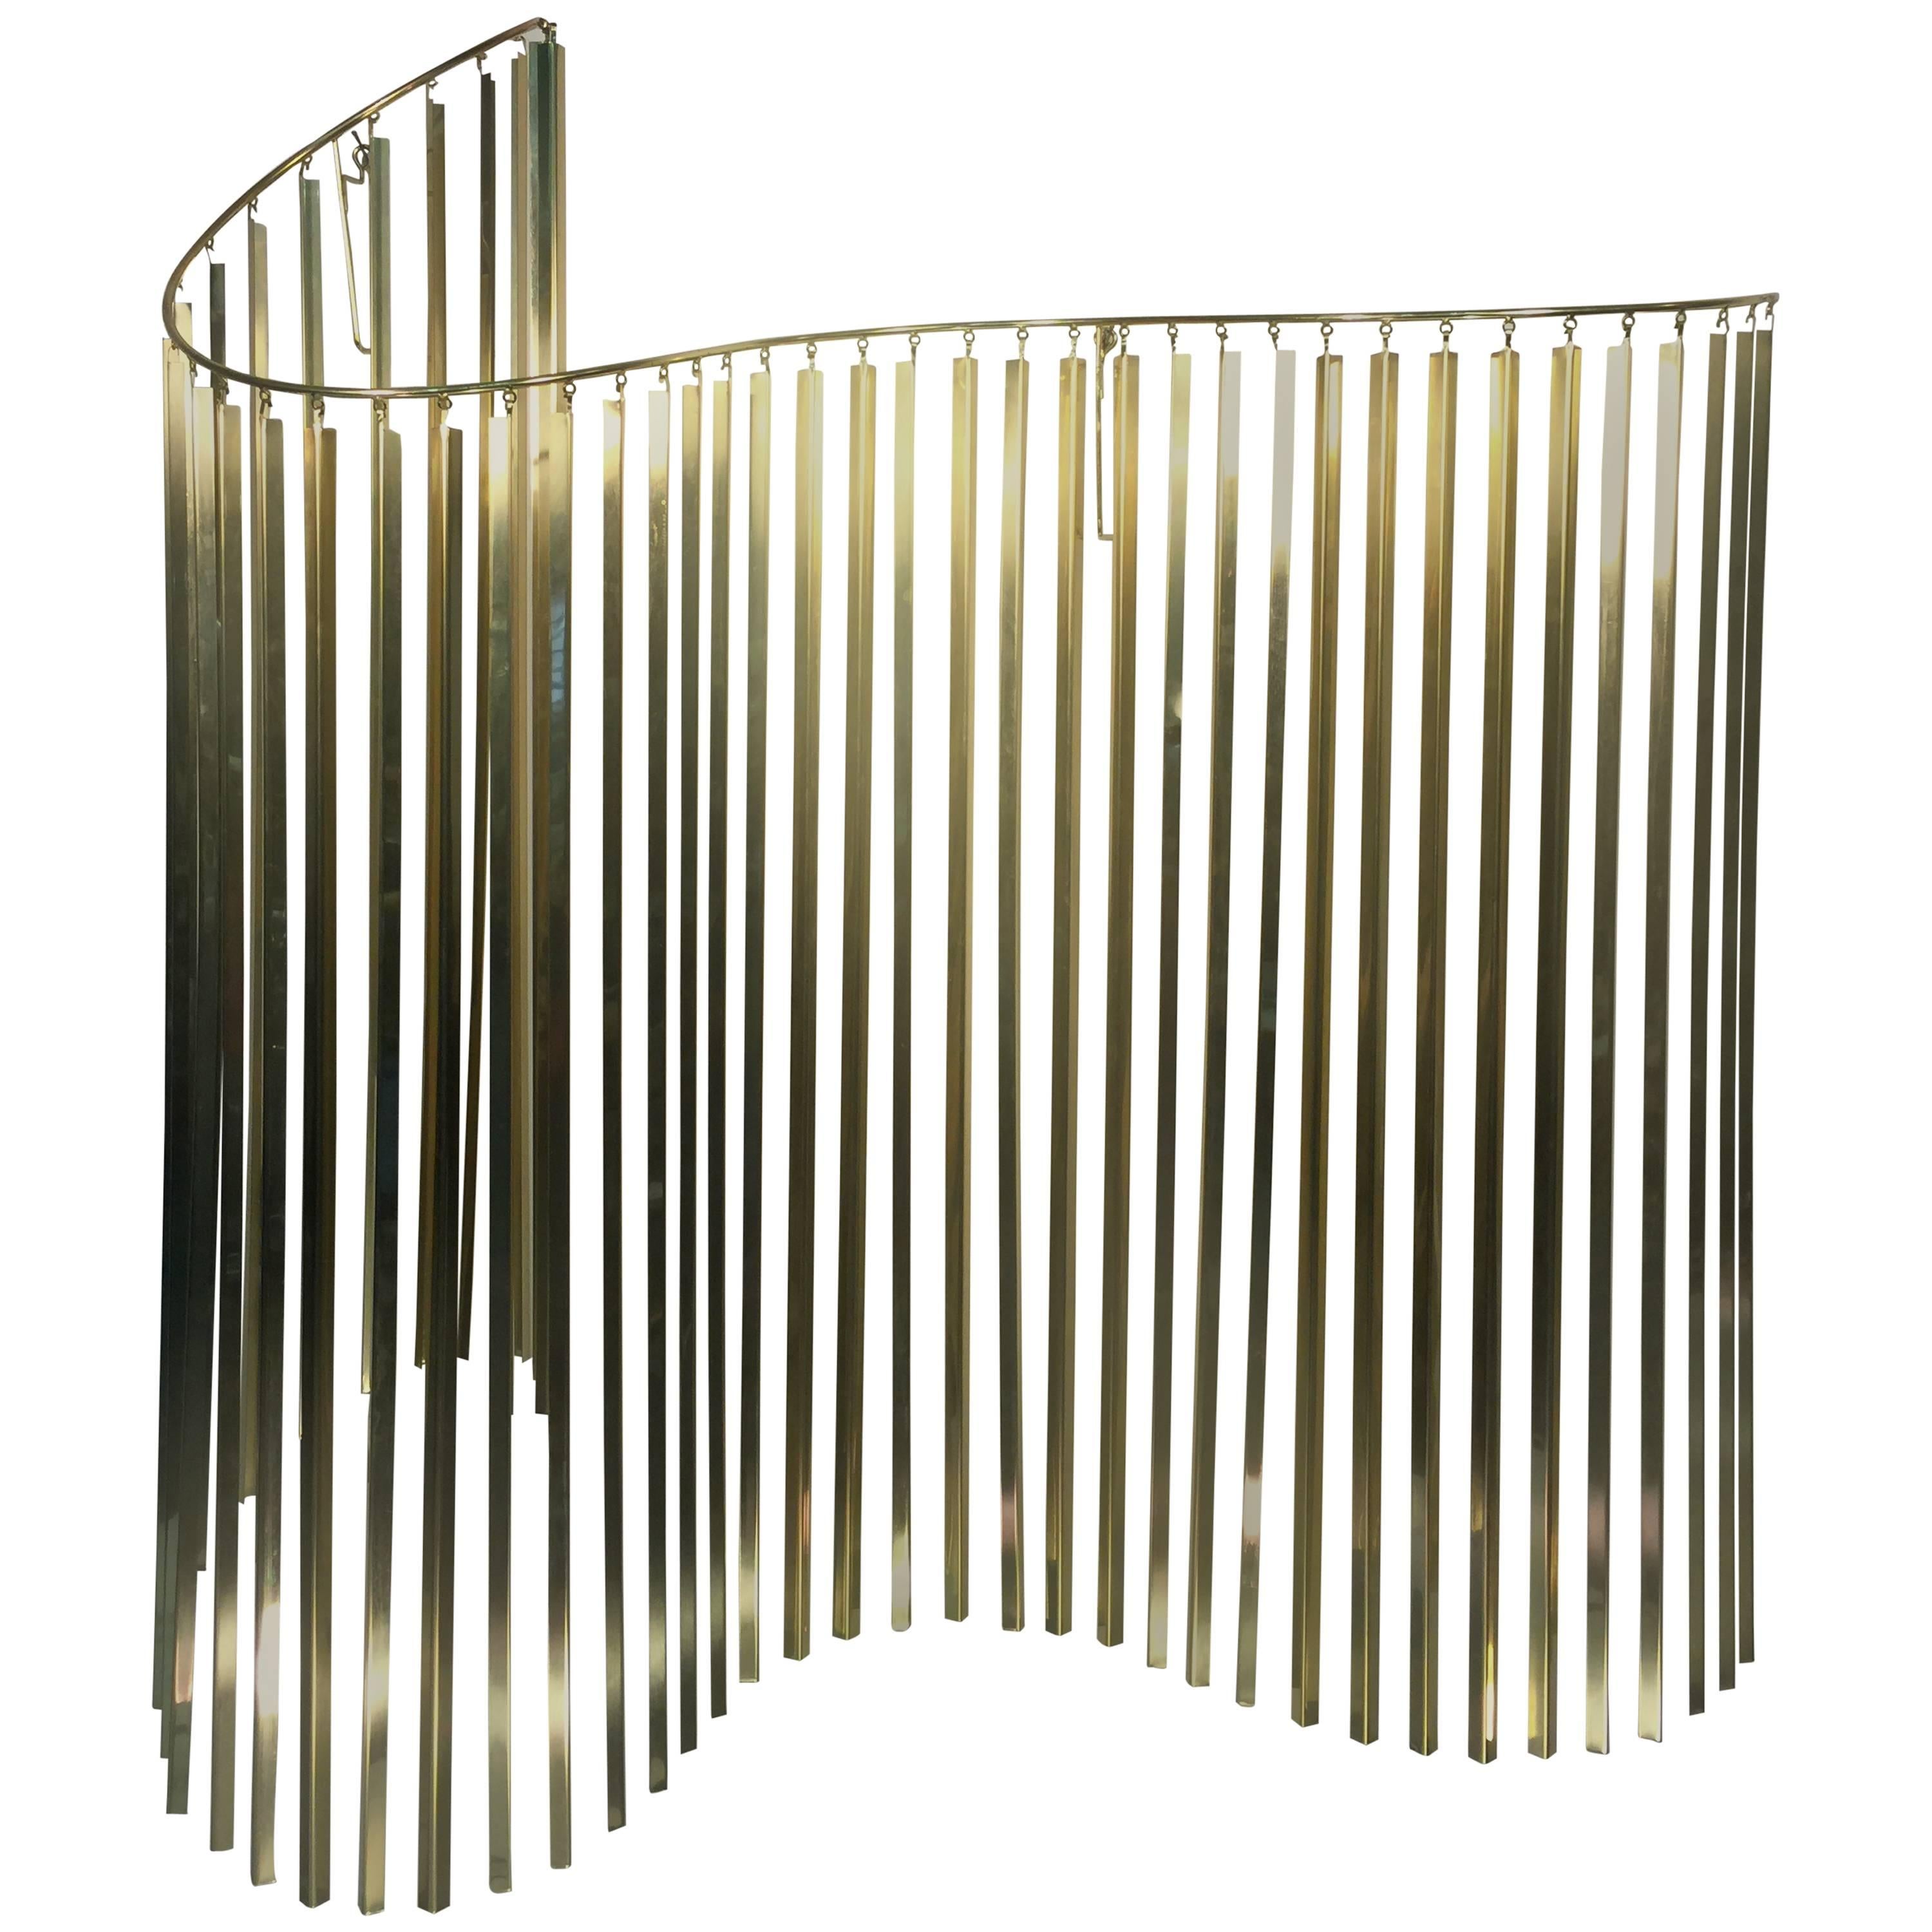 Wonderful Curtis Jere Kinetic Wave Form Chrome and Brass Wall Sculpture For Sale